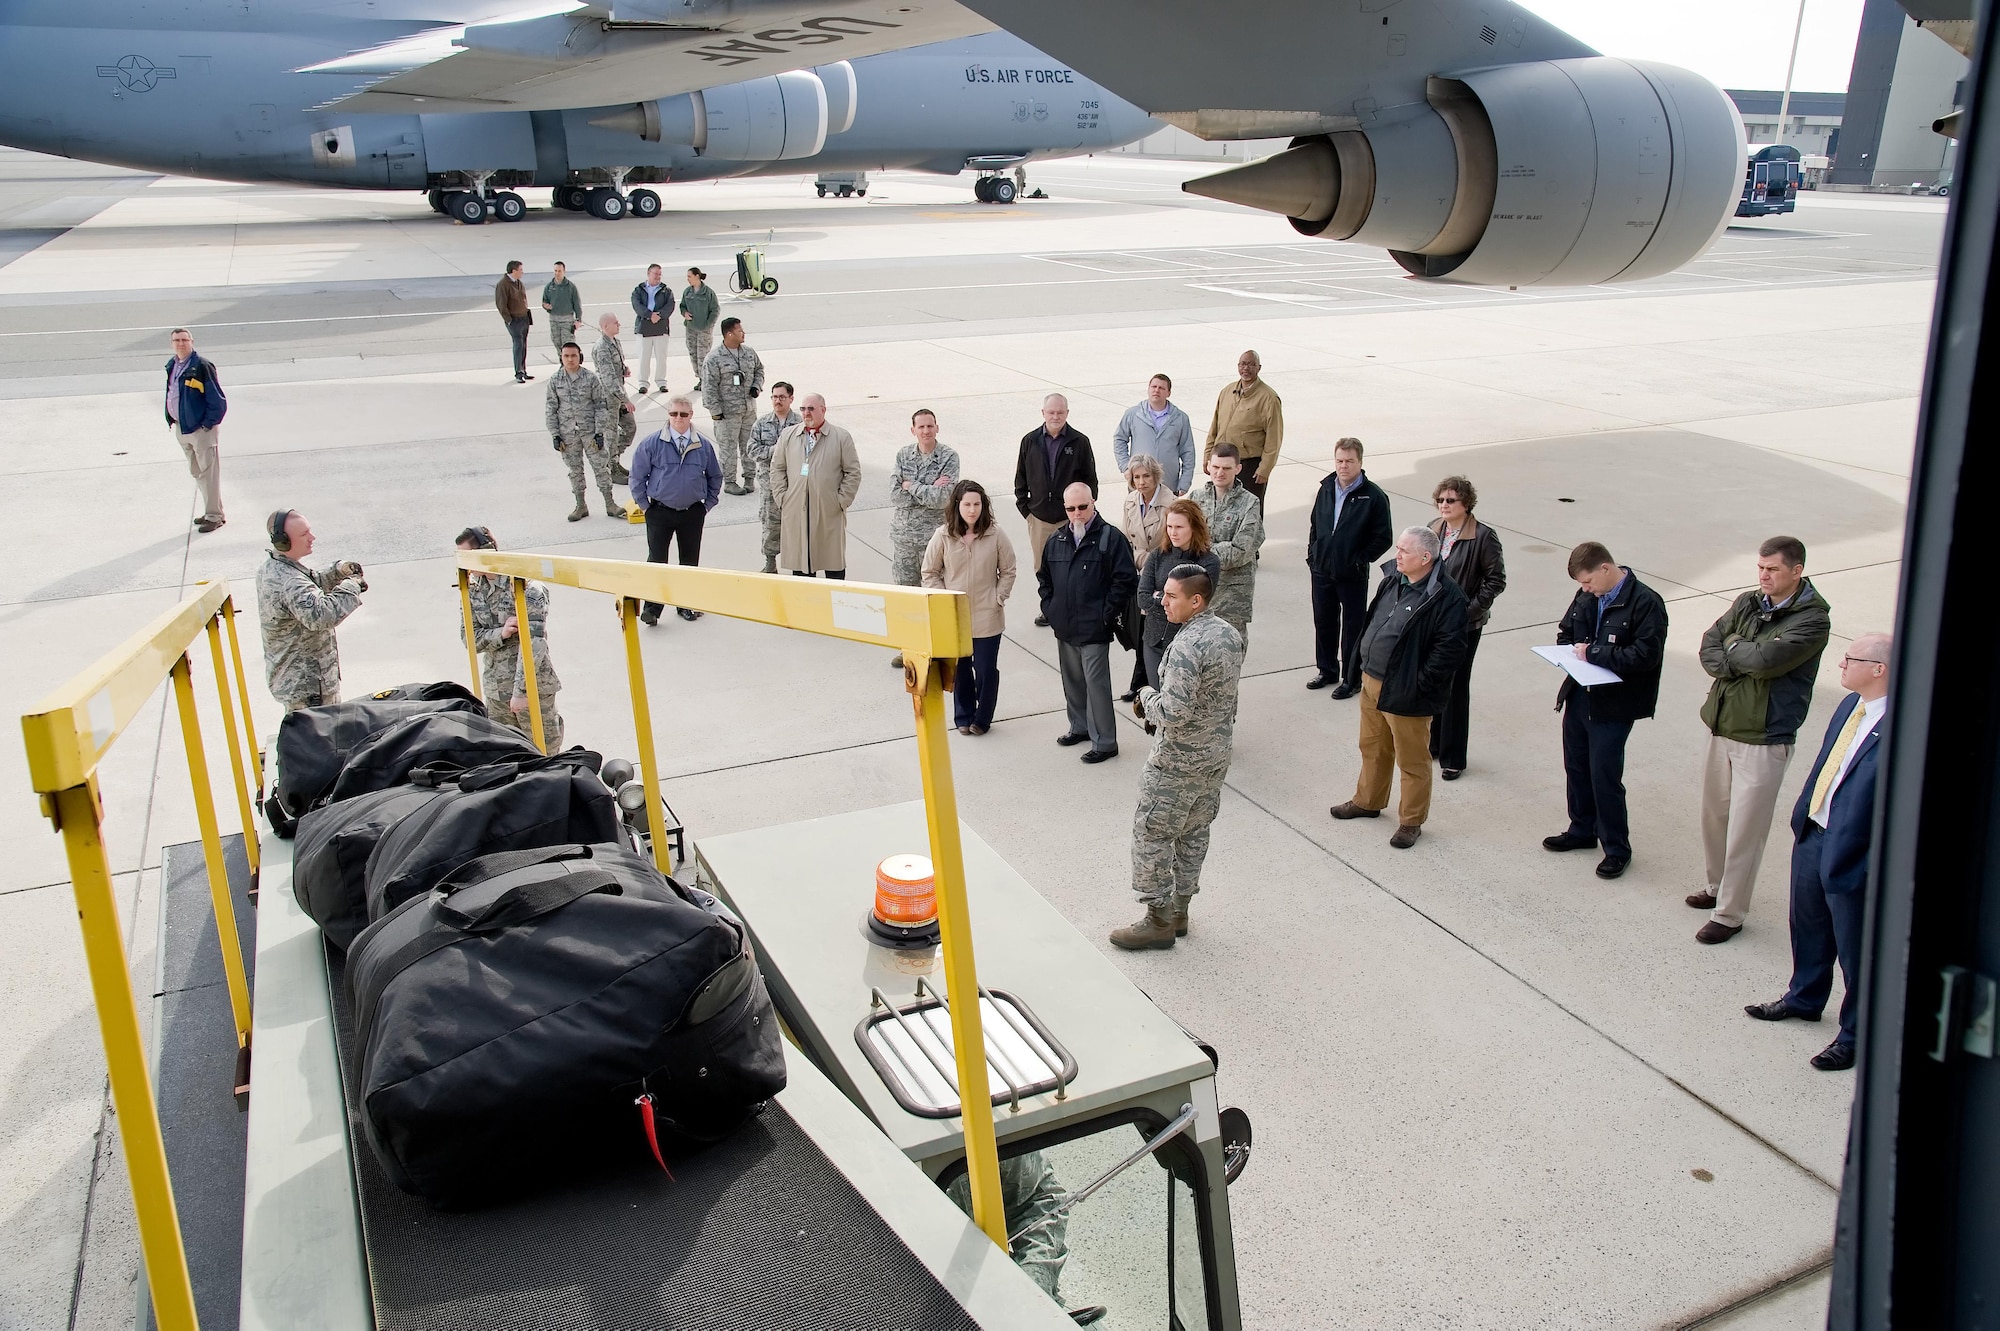 First Lt. Sylvester Fernandez de Castro, 436th Aerial Port Squadron flight commander of the Passenger Service Flight and Fleet Flight, along with fleet service personnel demonstrate the use of the baggage conveyor to load bags containing blankets, pillows and supplies onto a C-5M Super Galaxy Feb. 8, 2017, on Dover Air Force Base, Del. Members of Air Mobility Command’s “Aerial Port of the Future” study team from Scott Air Force Base, Ill., observed the loading of the bags through the “7 Left” troop door that are loaded when carrying passengers in the troop compartment. (U.S. Air Force photo by Roland Balik)